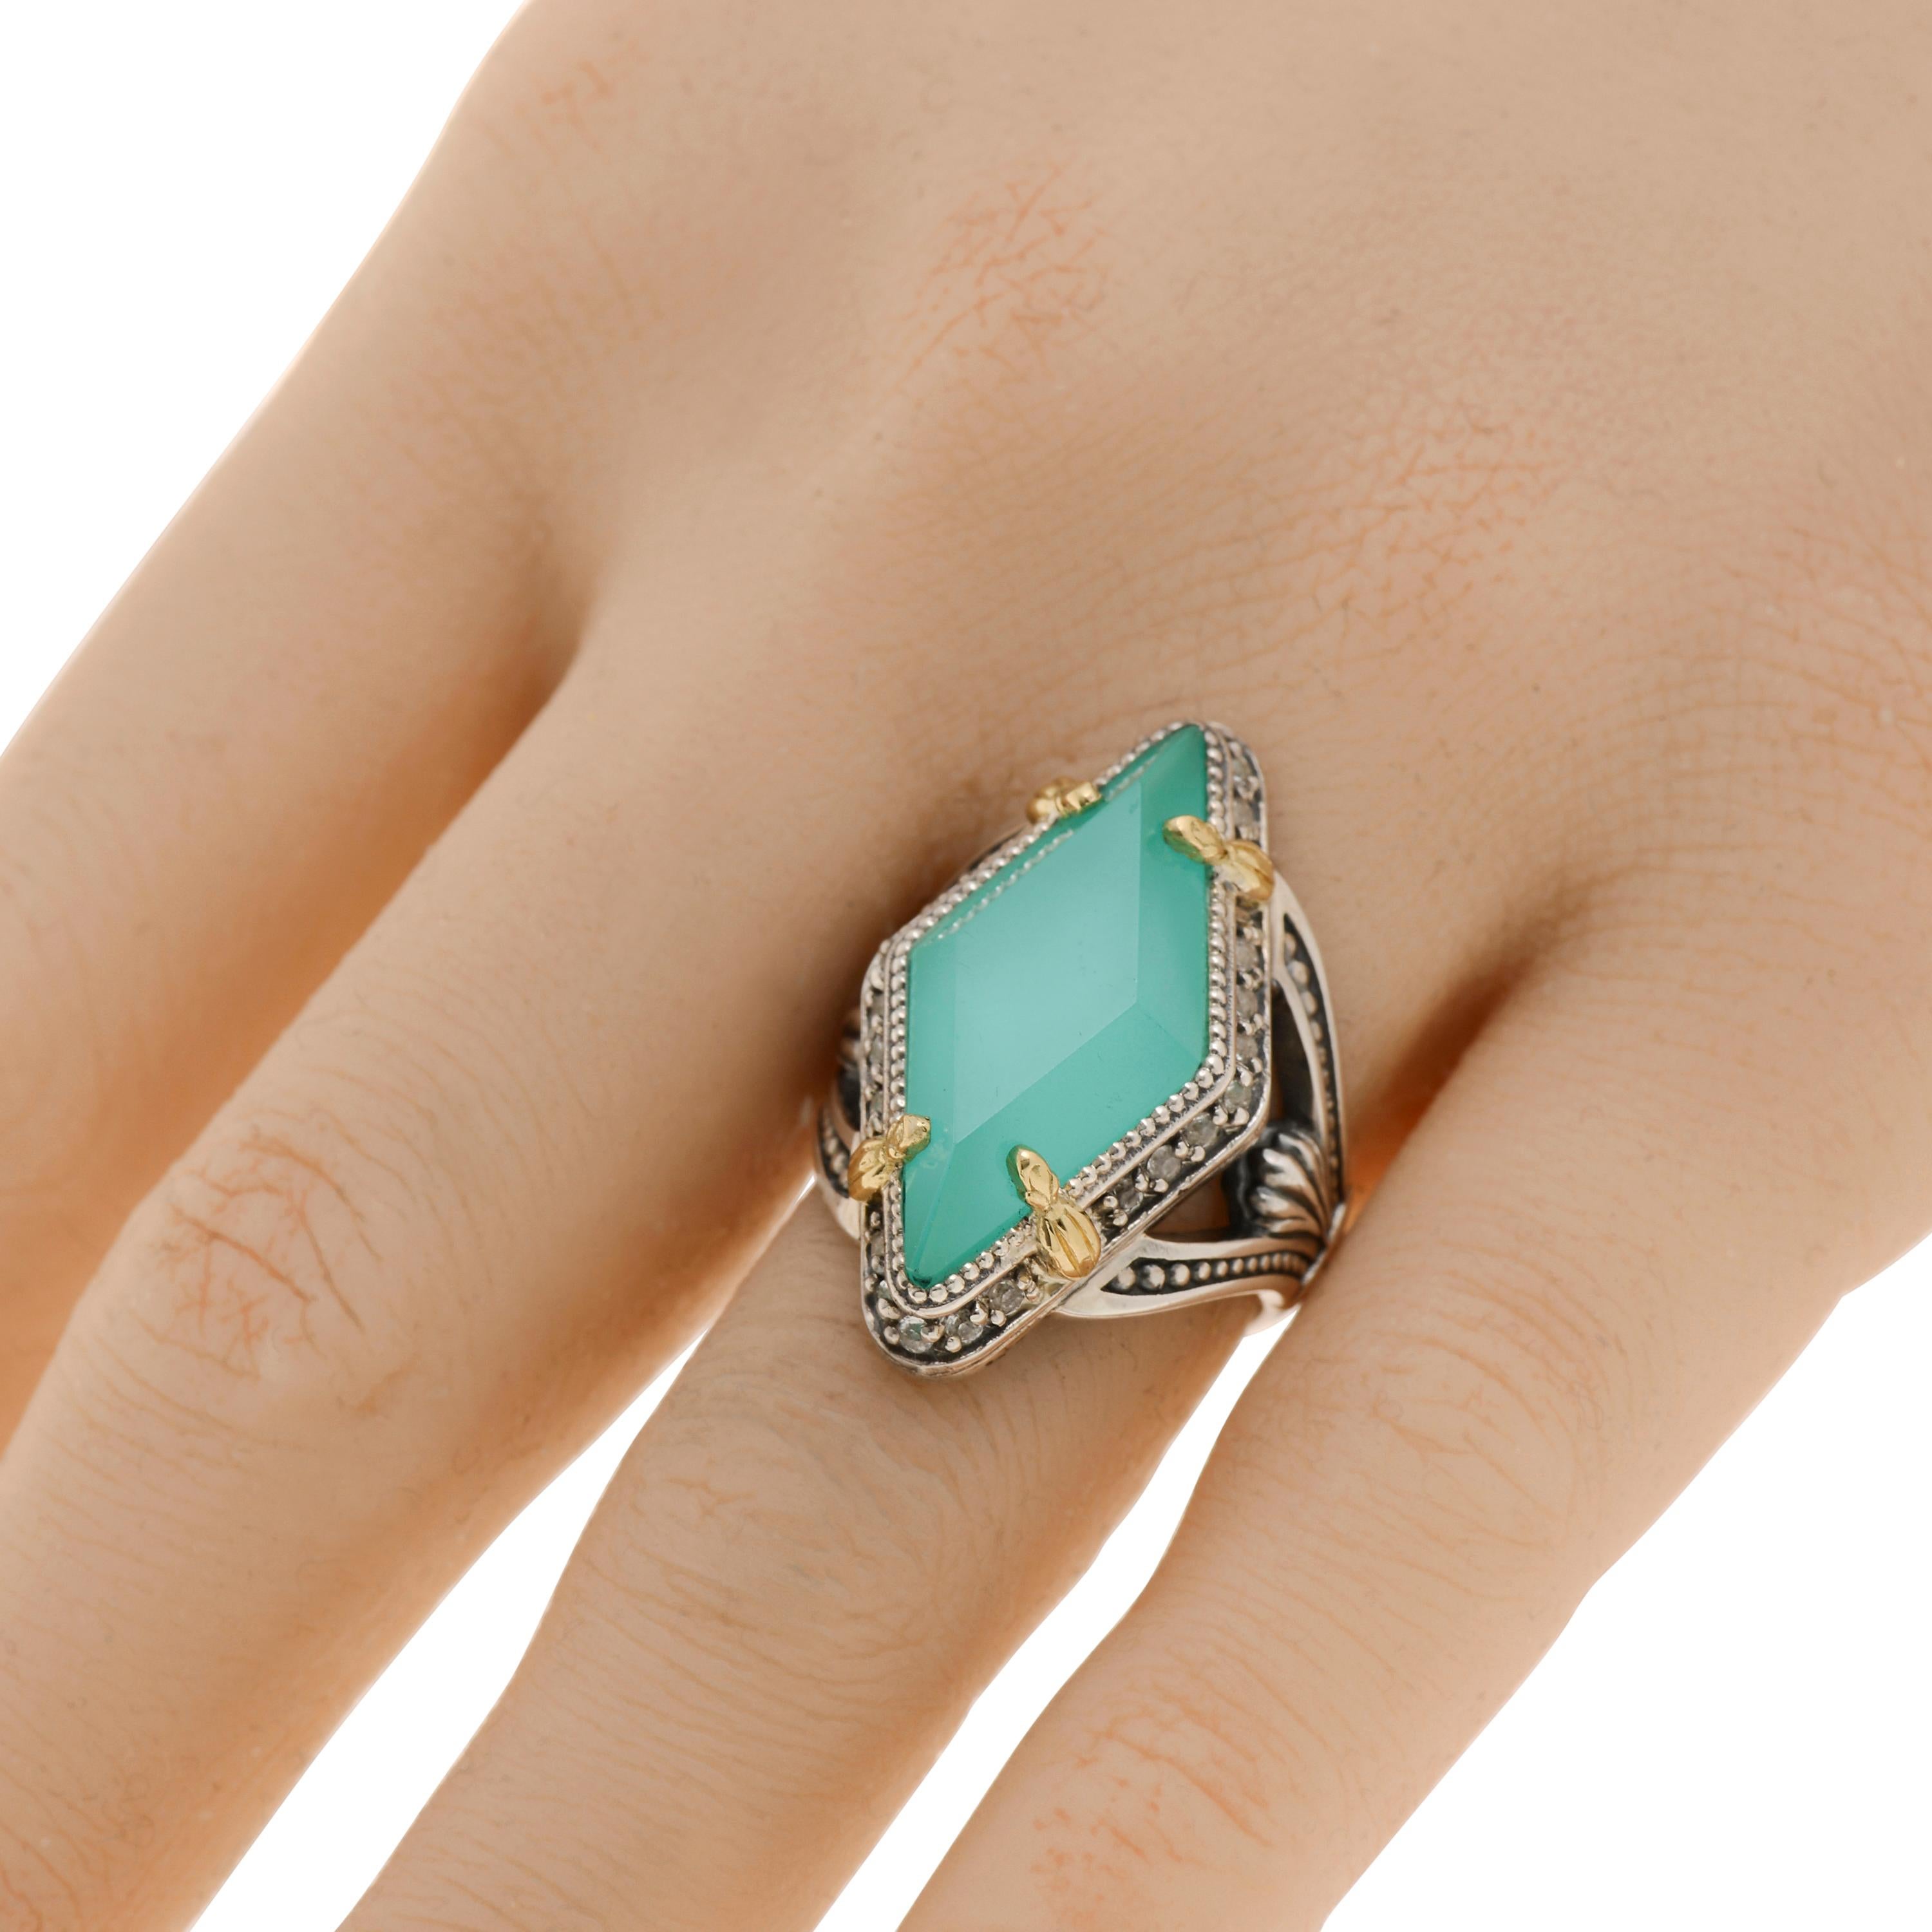 This eye-catching Konstantino ring features a teal chalcedony doublet white topaz center, set in sterling silver with 18K yellow gold accents. The decoration size is 5/8” x 1 1/8”. The weight is 13g. The ring size is 7 (54.4).
